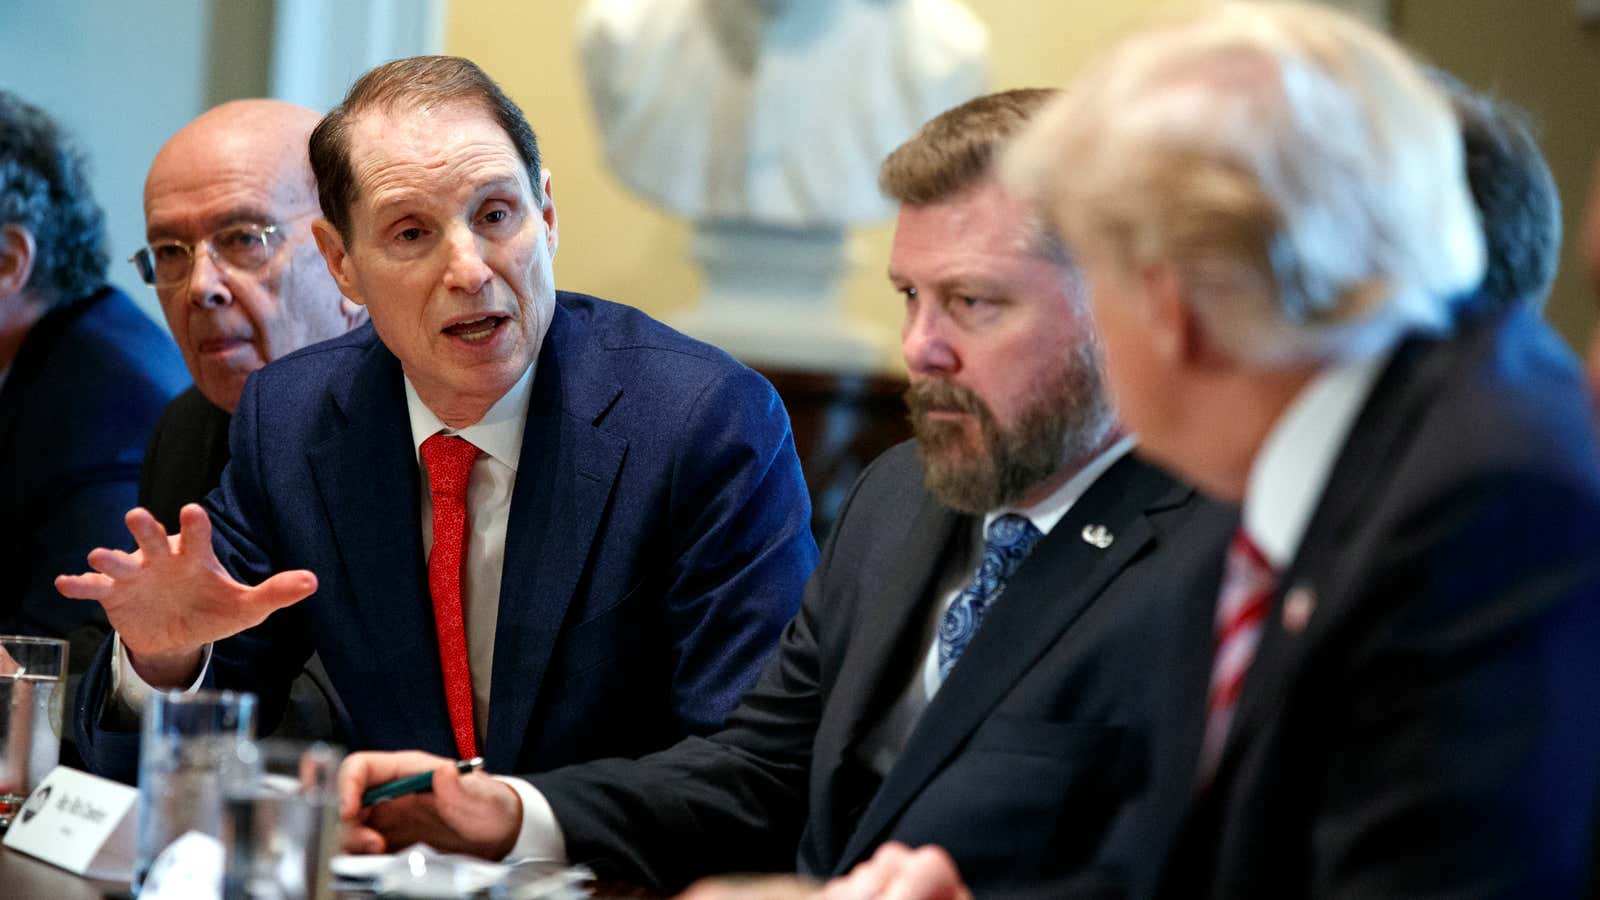 Wyden talks to Trump at a February 2018 trade policy meeting.